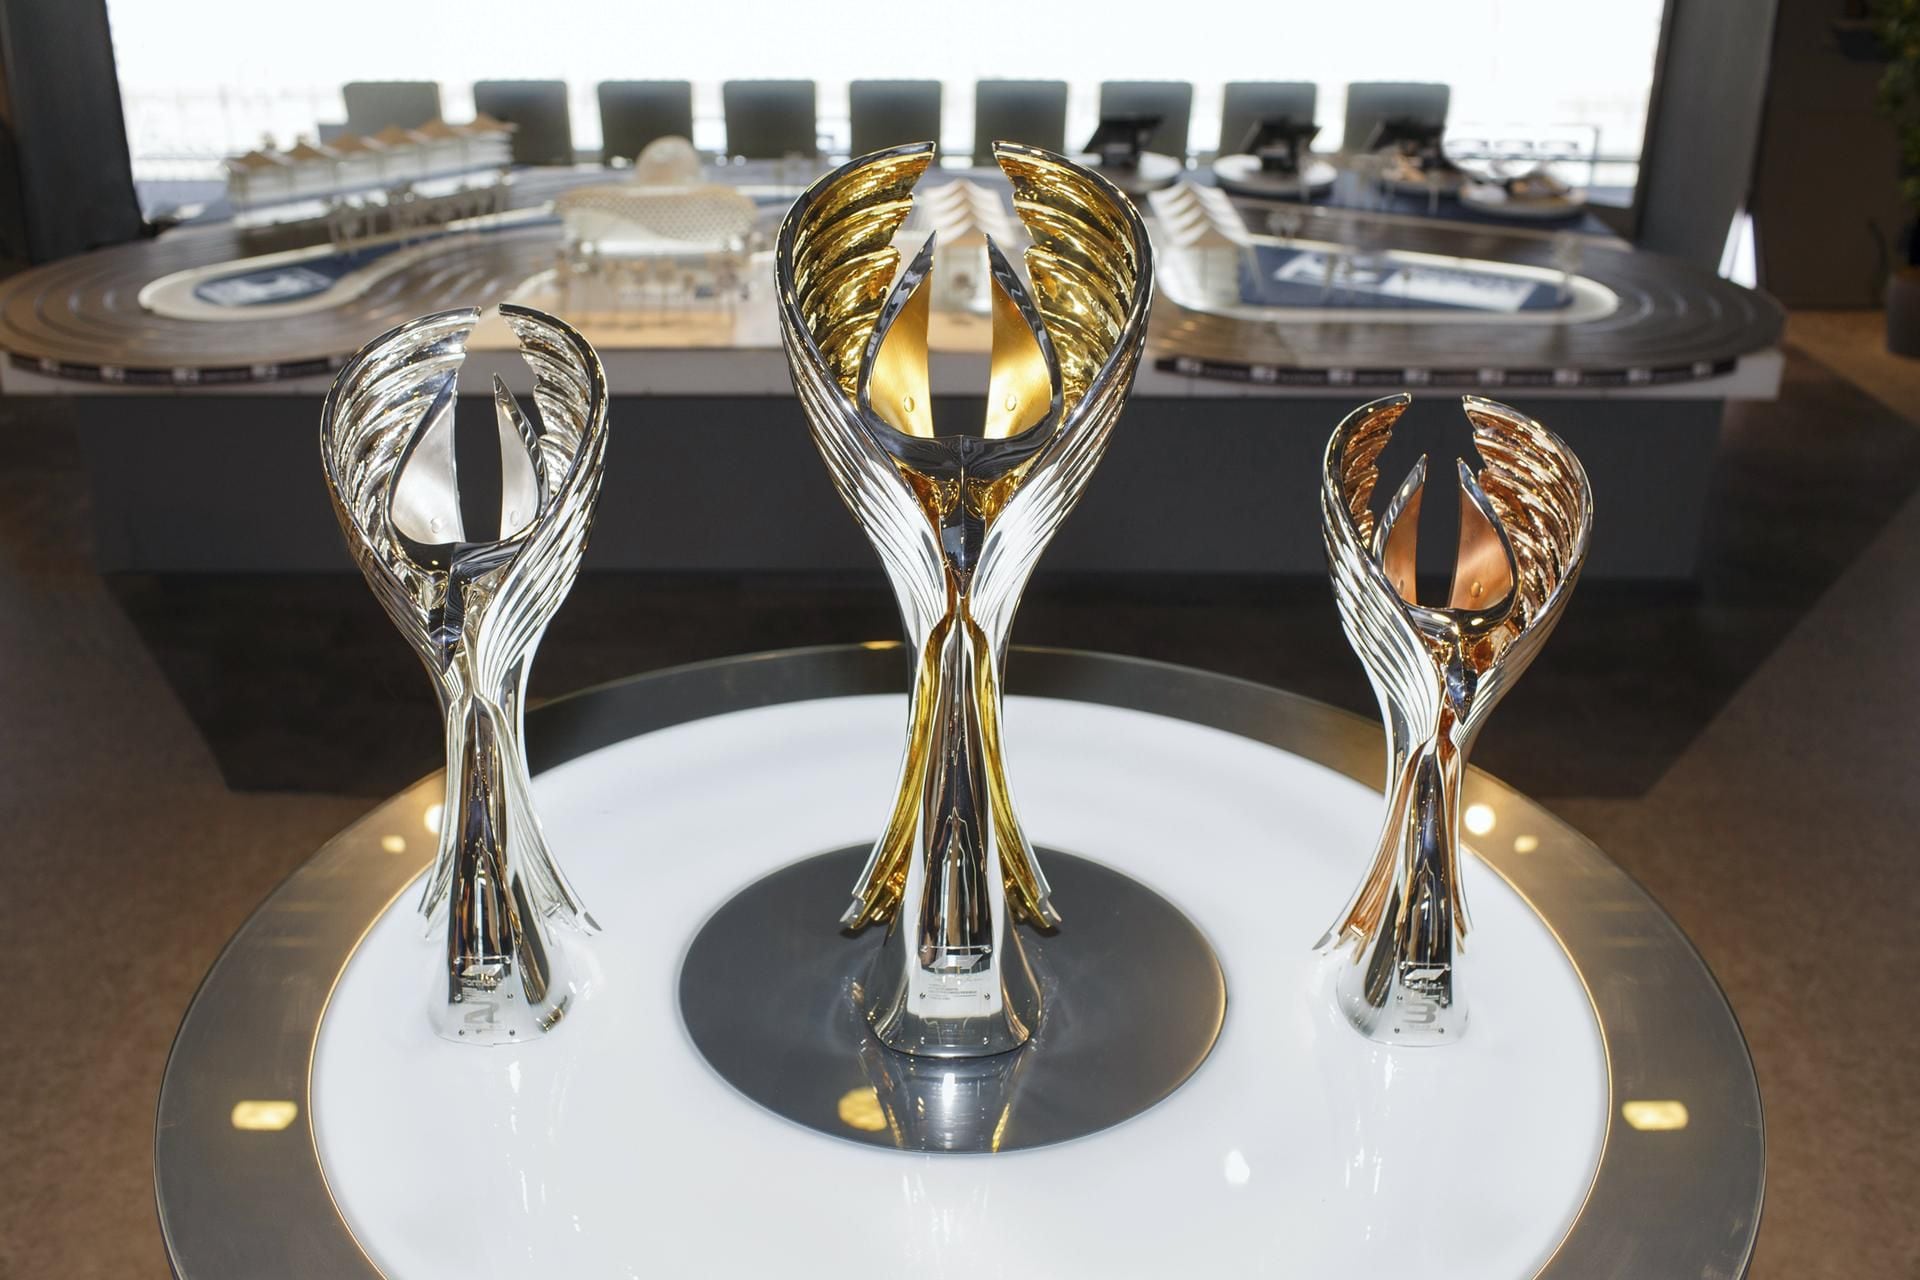 New UAE-inspired trophies unveiled at Abu Dhabi Grand Prix